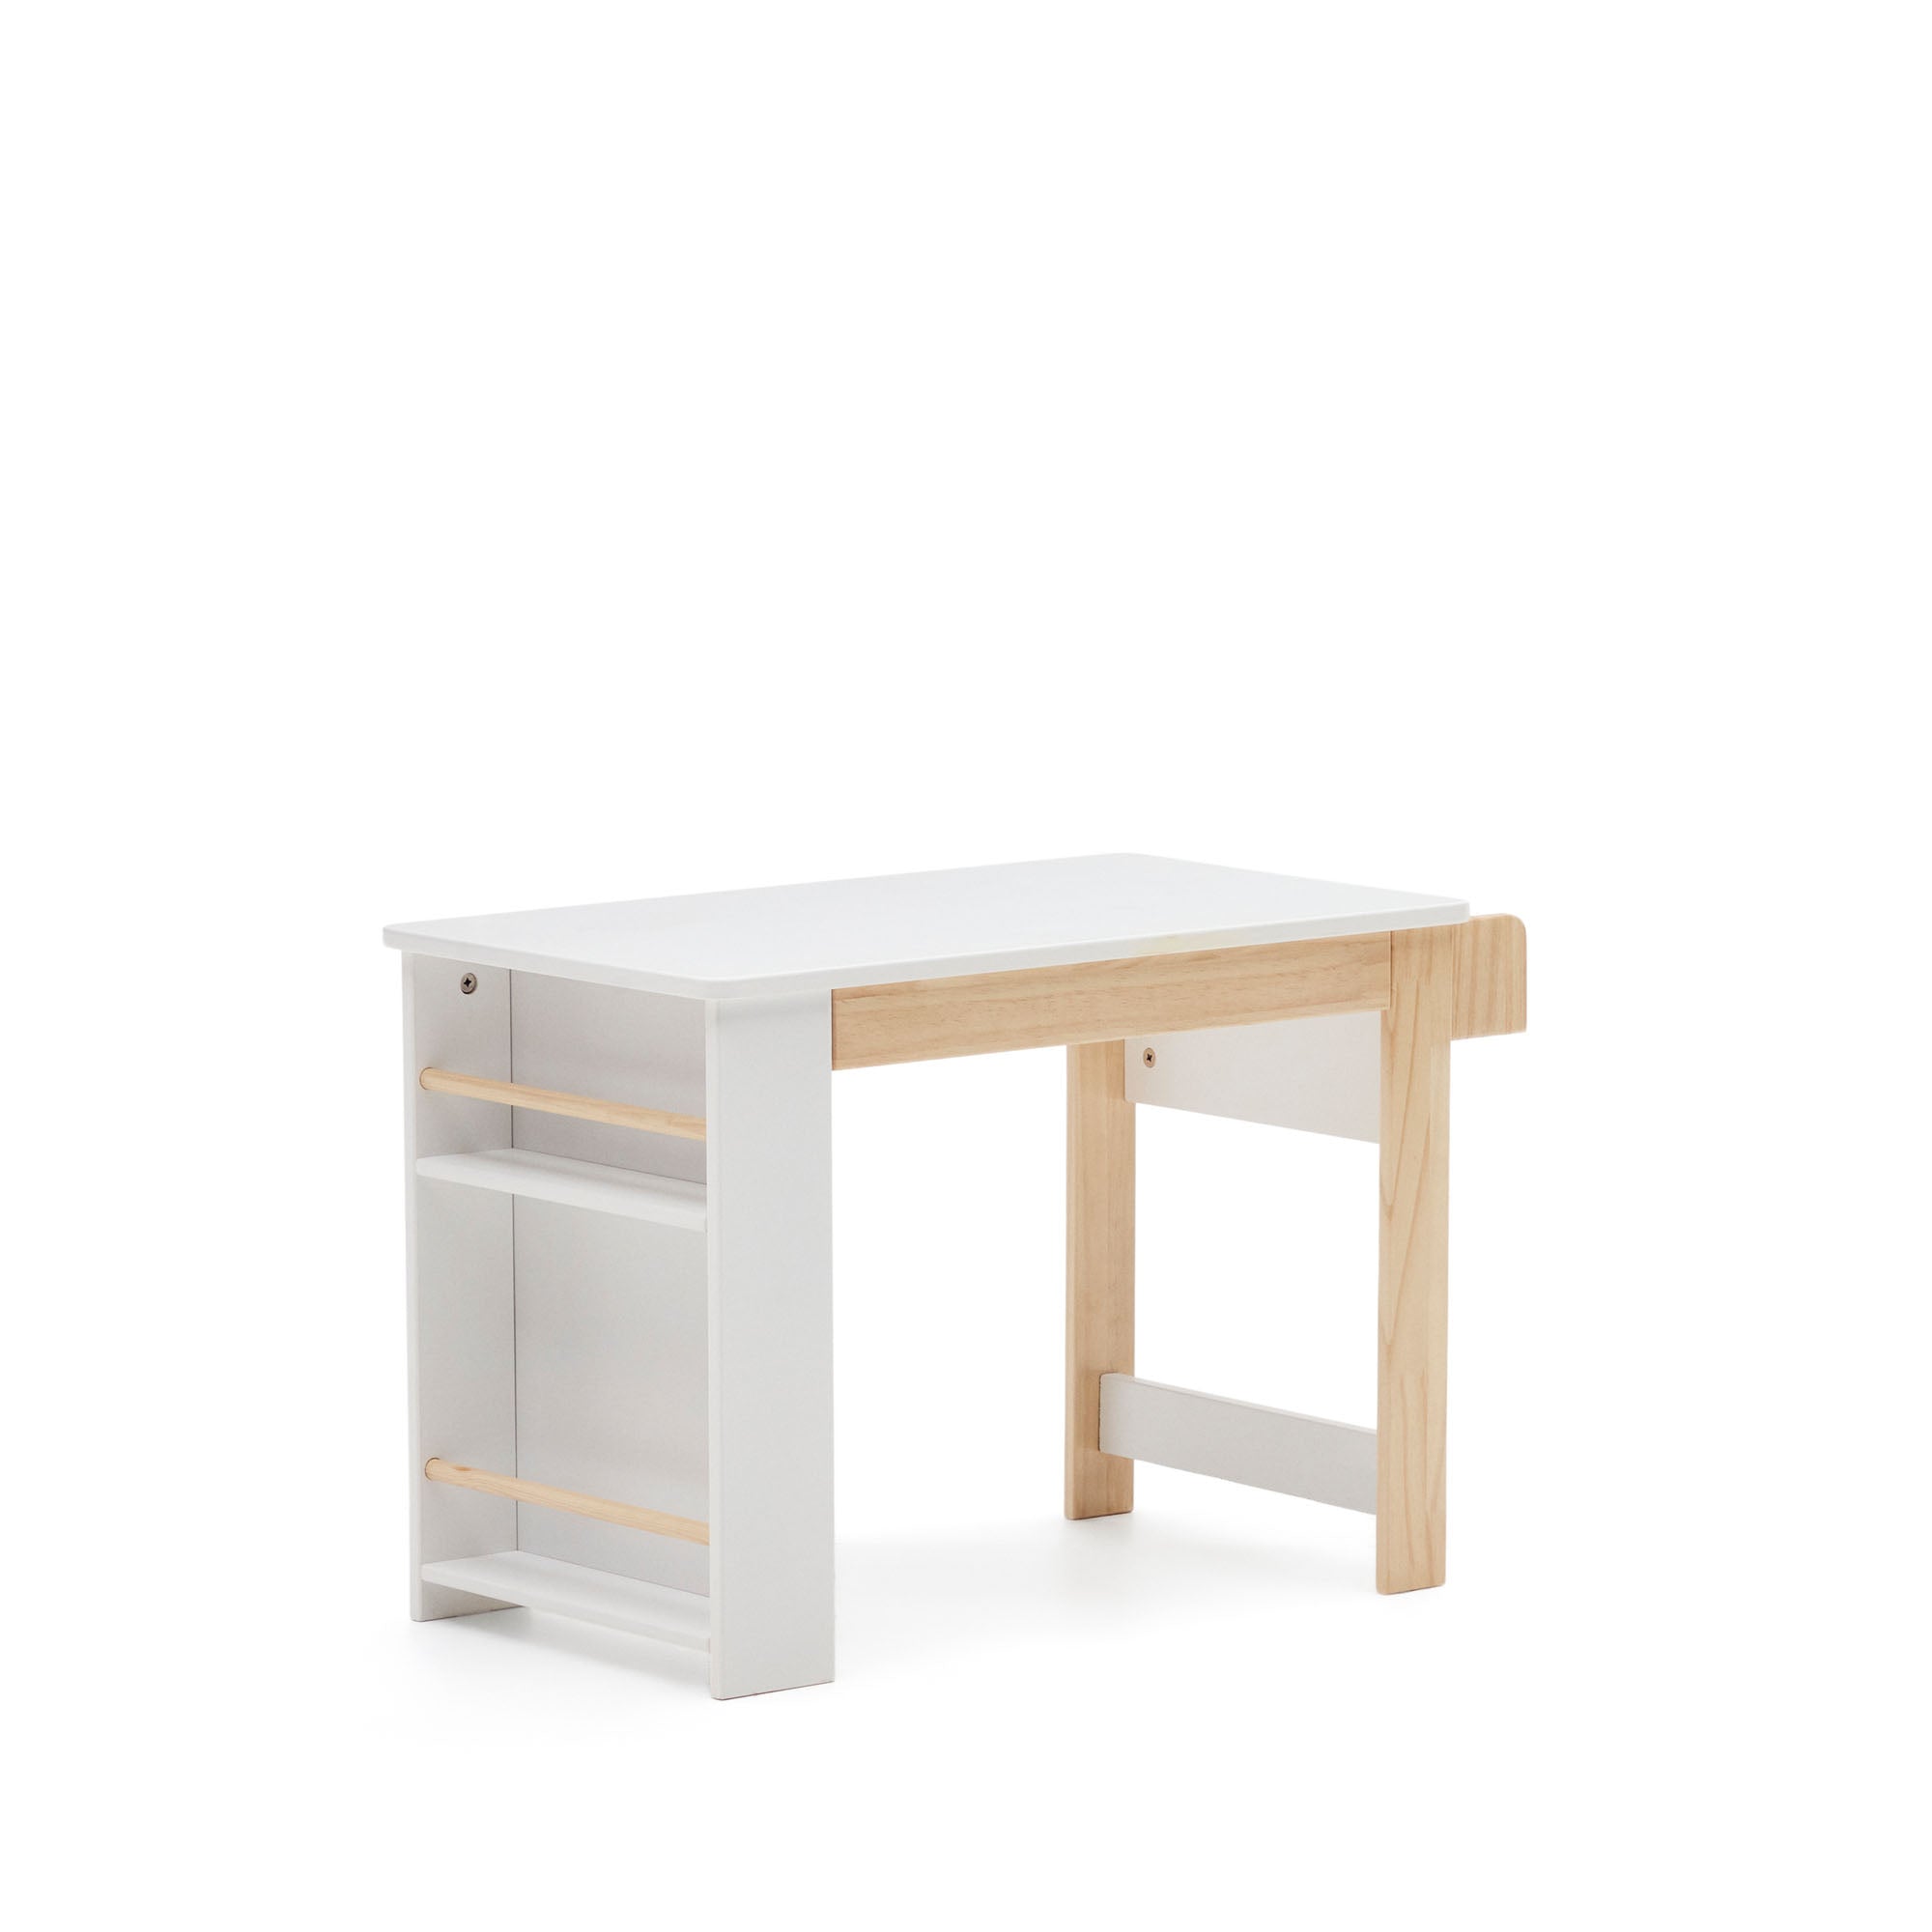 Serwa desk in white MDF and solid pine legs and details FSC MIX Credit